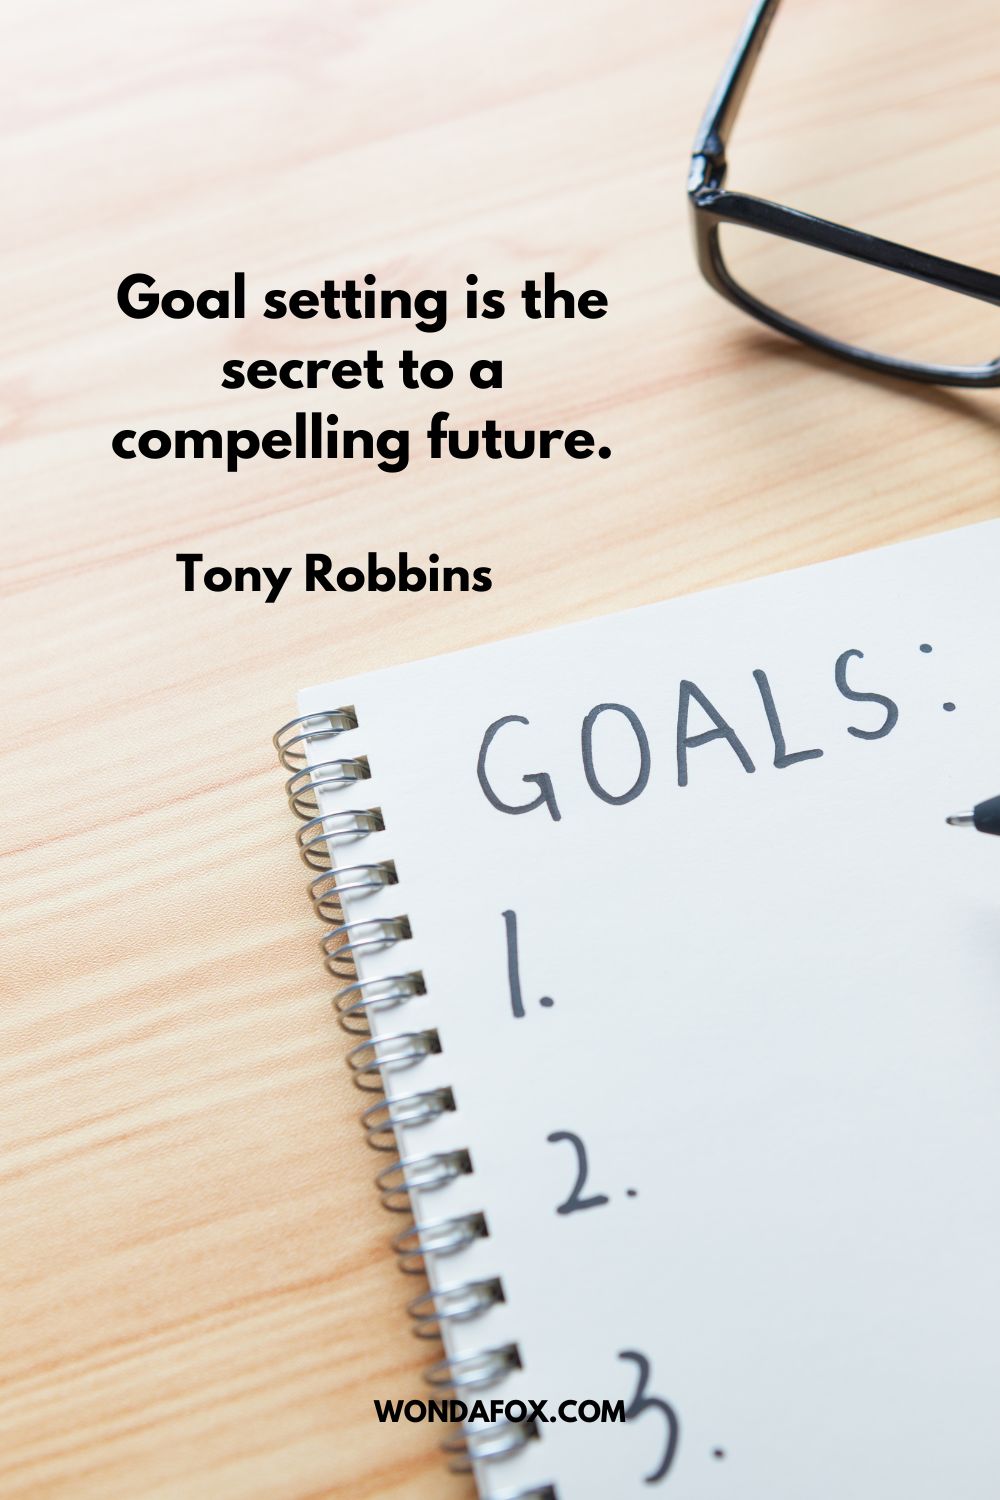 Goal setting is the secret to a compelling future. Tony Robbins